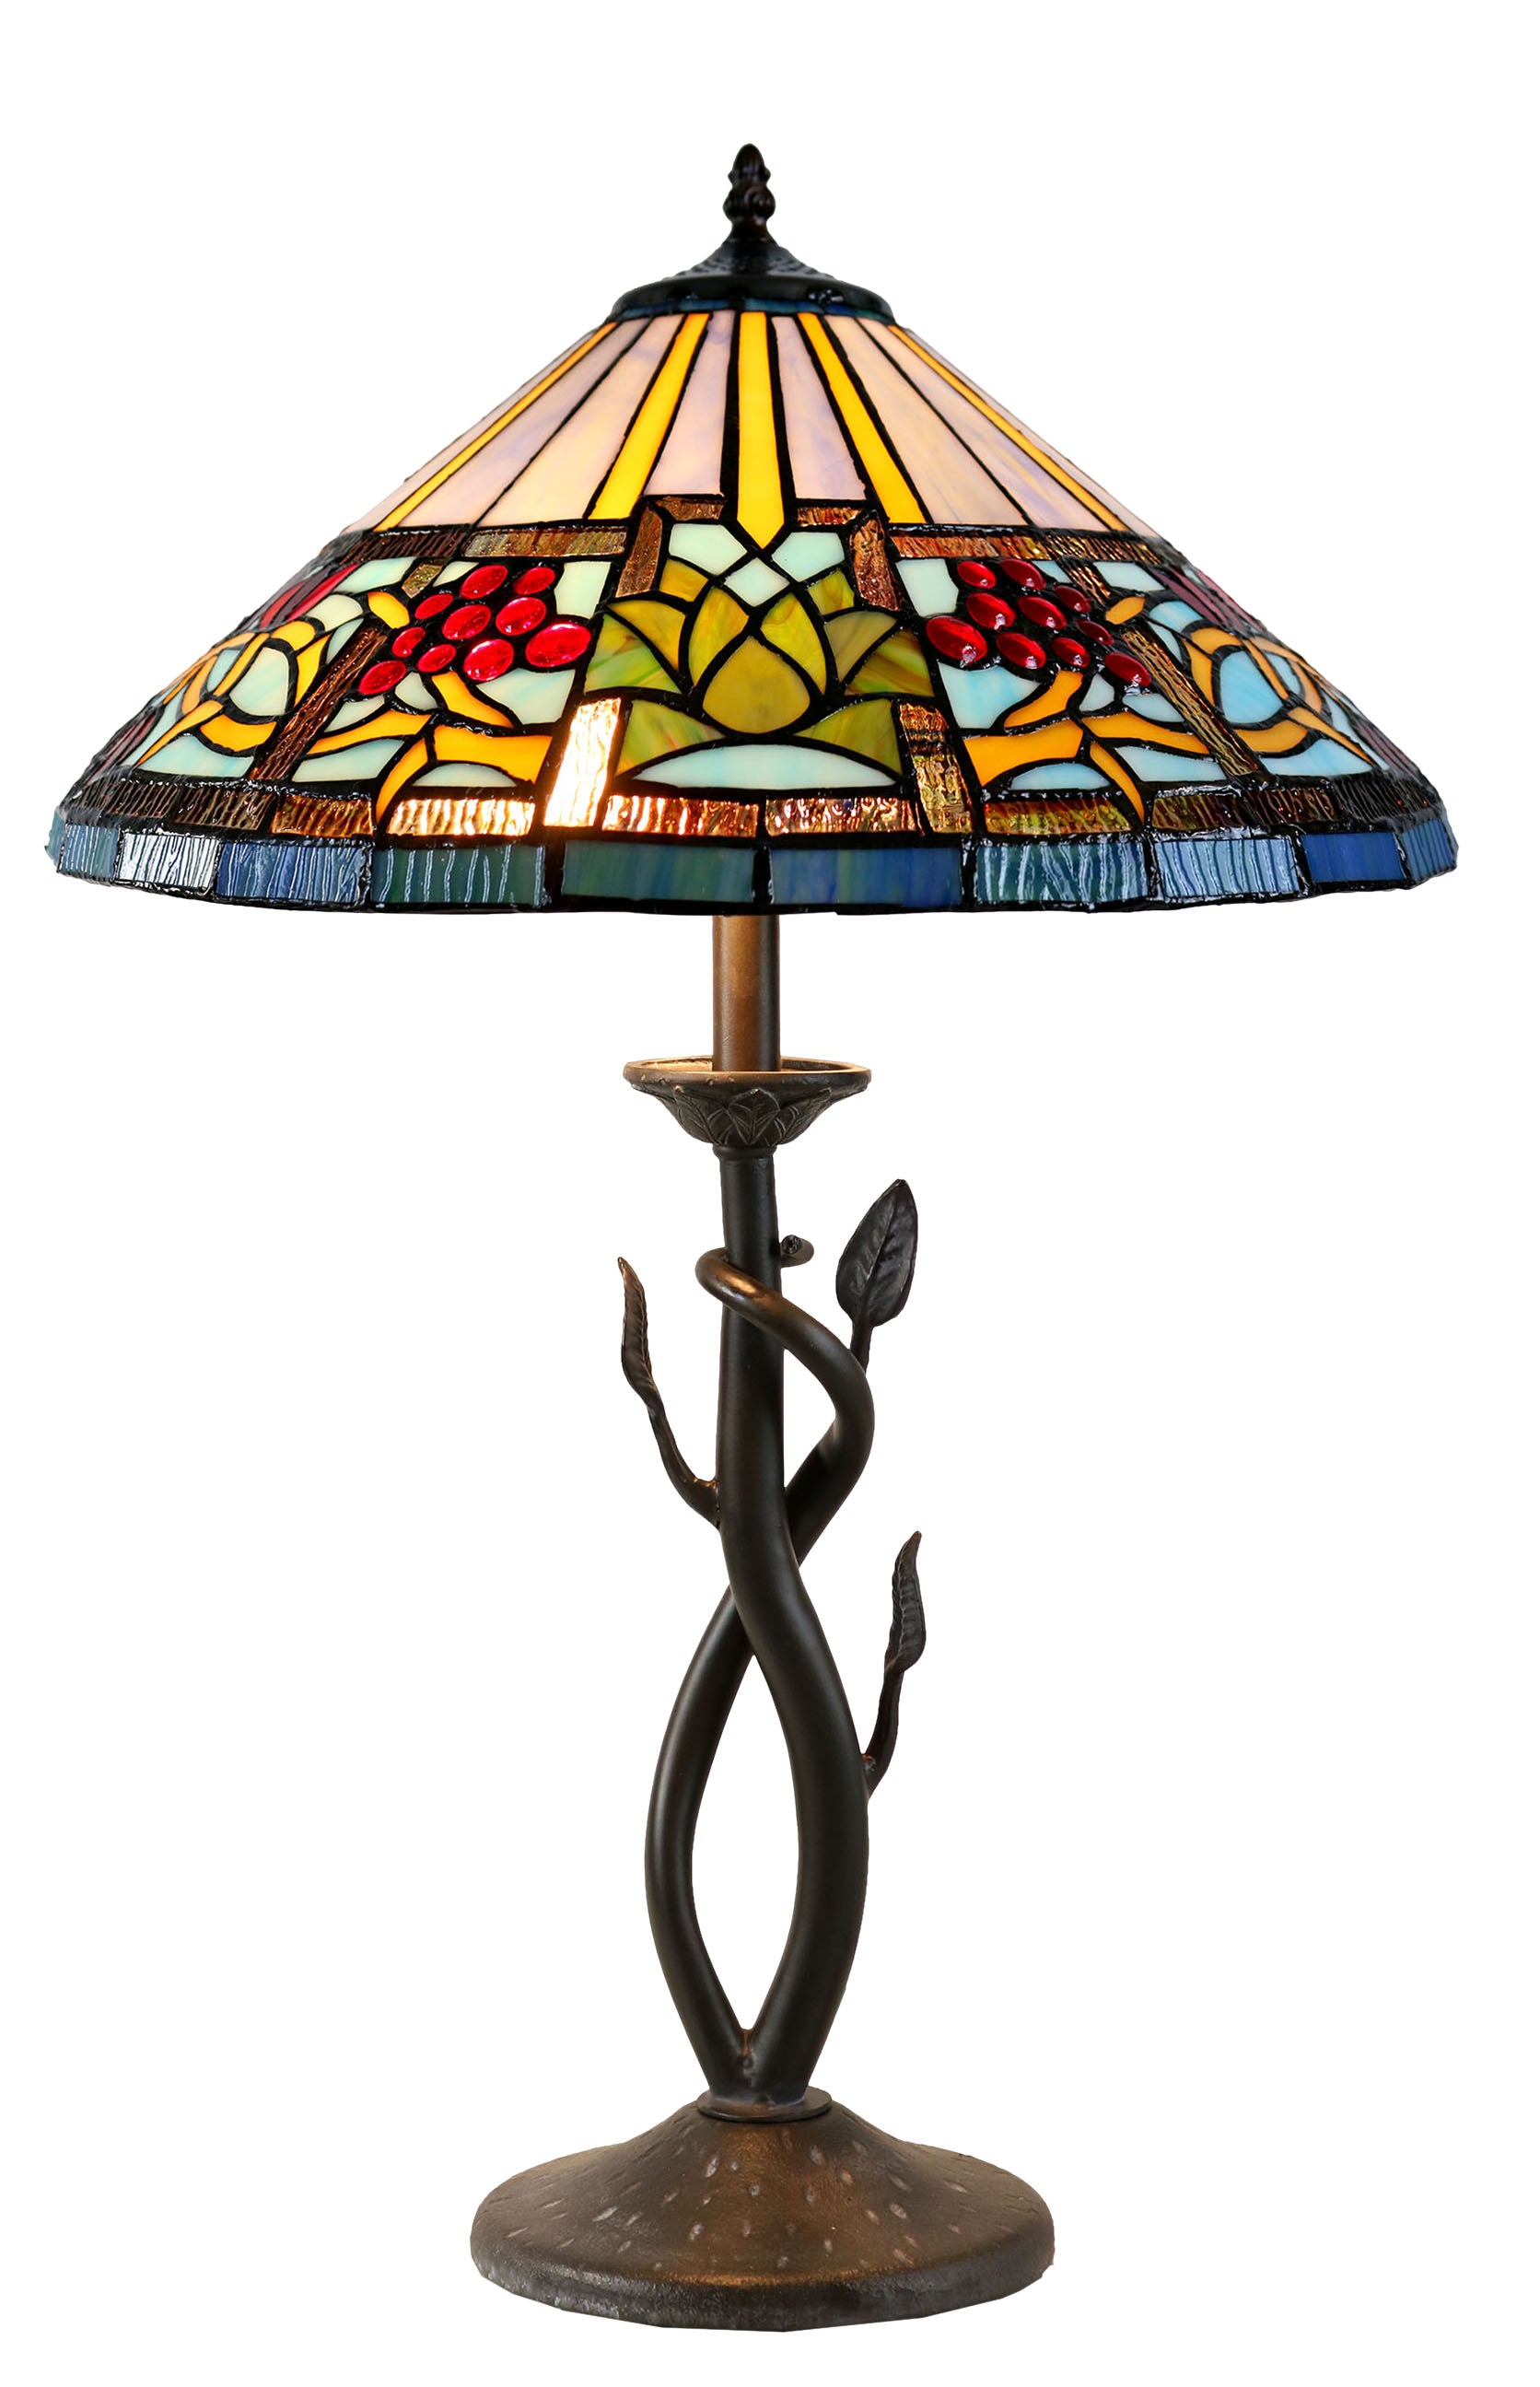 16" Red Fruit Berry Bean Wisteria Tiffany Table Lamp Country and Rustic Style Iron base